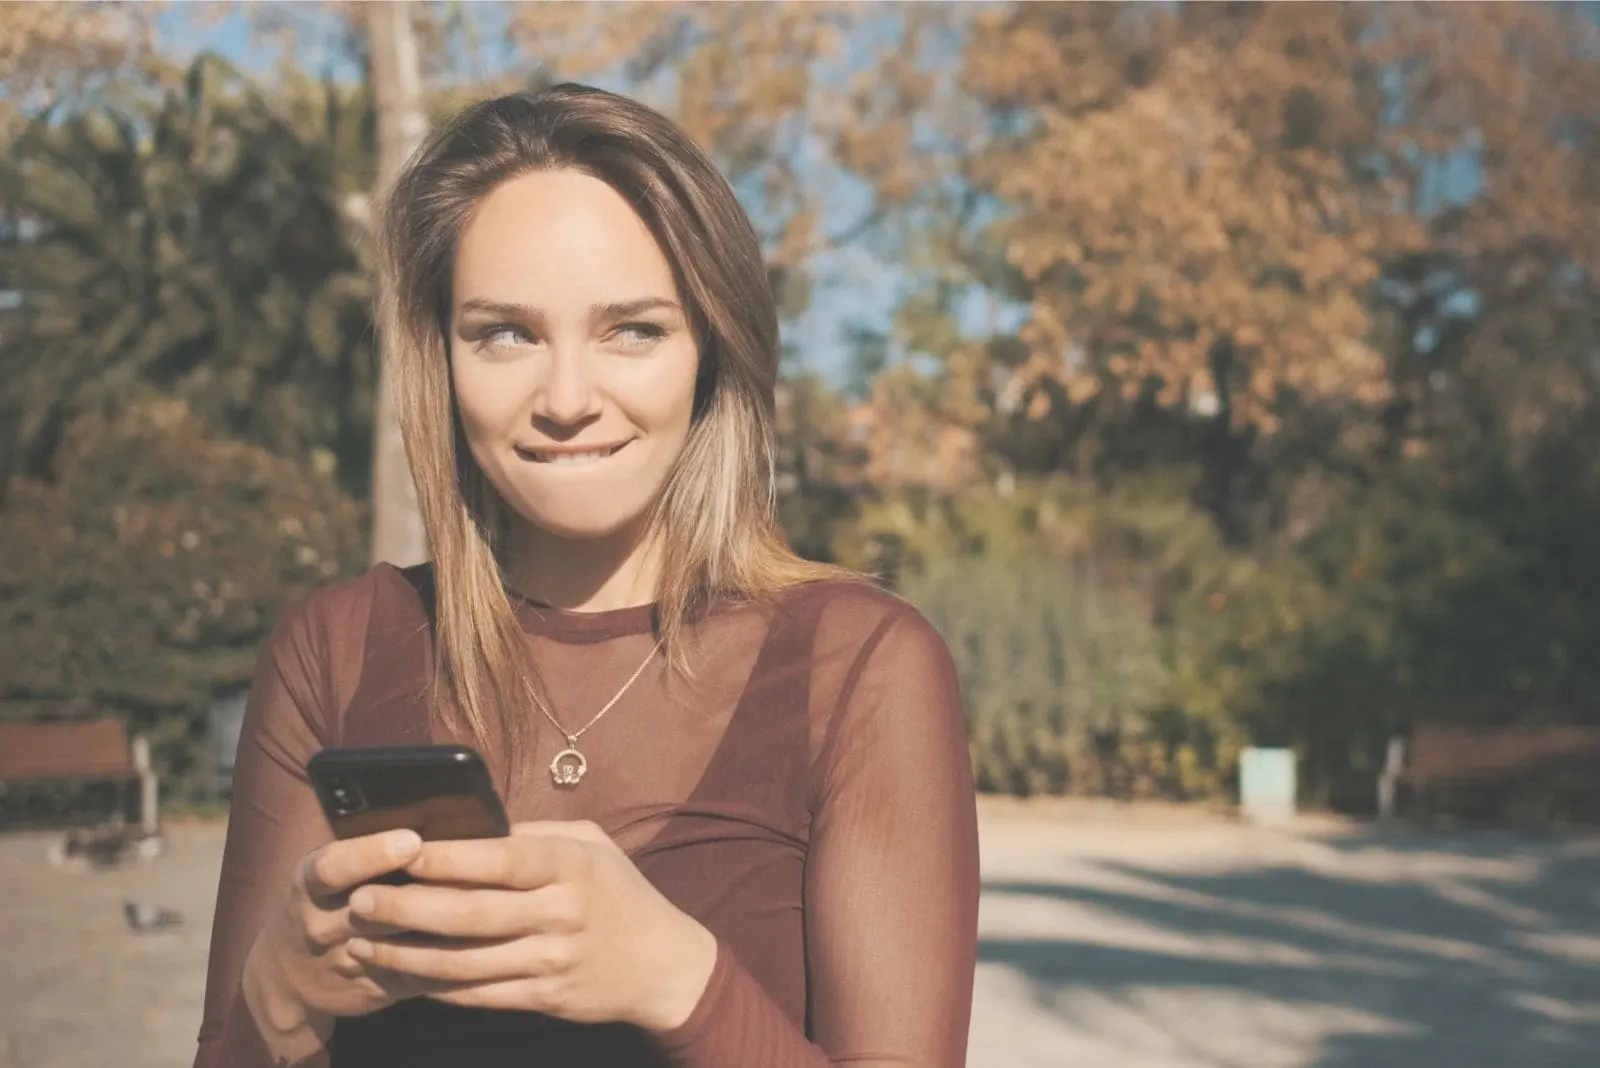 woman biting lip while texting and looking away standing outdoors